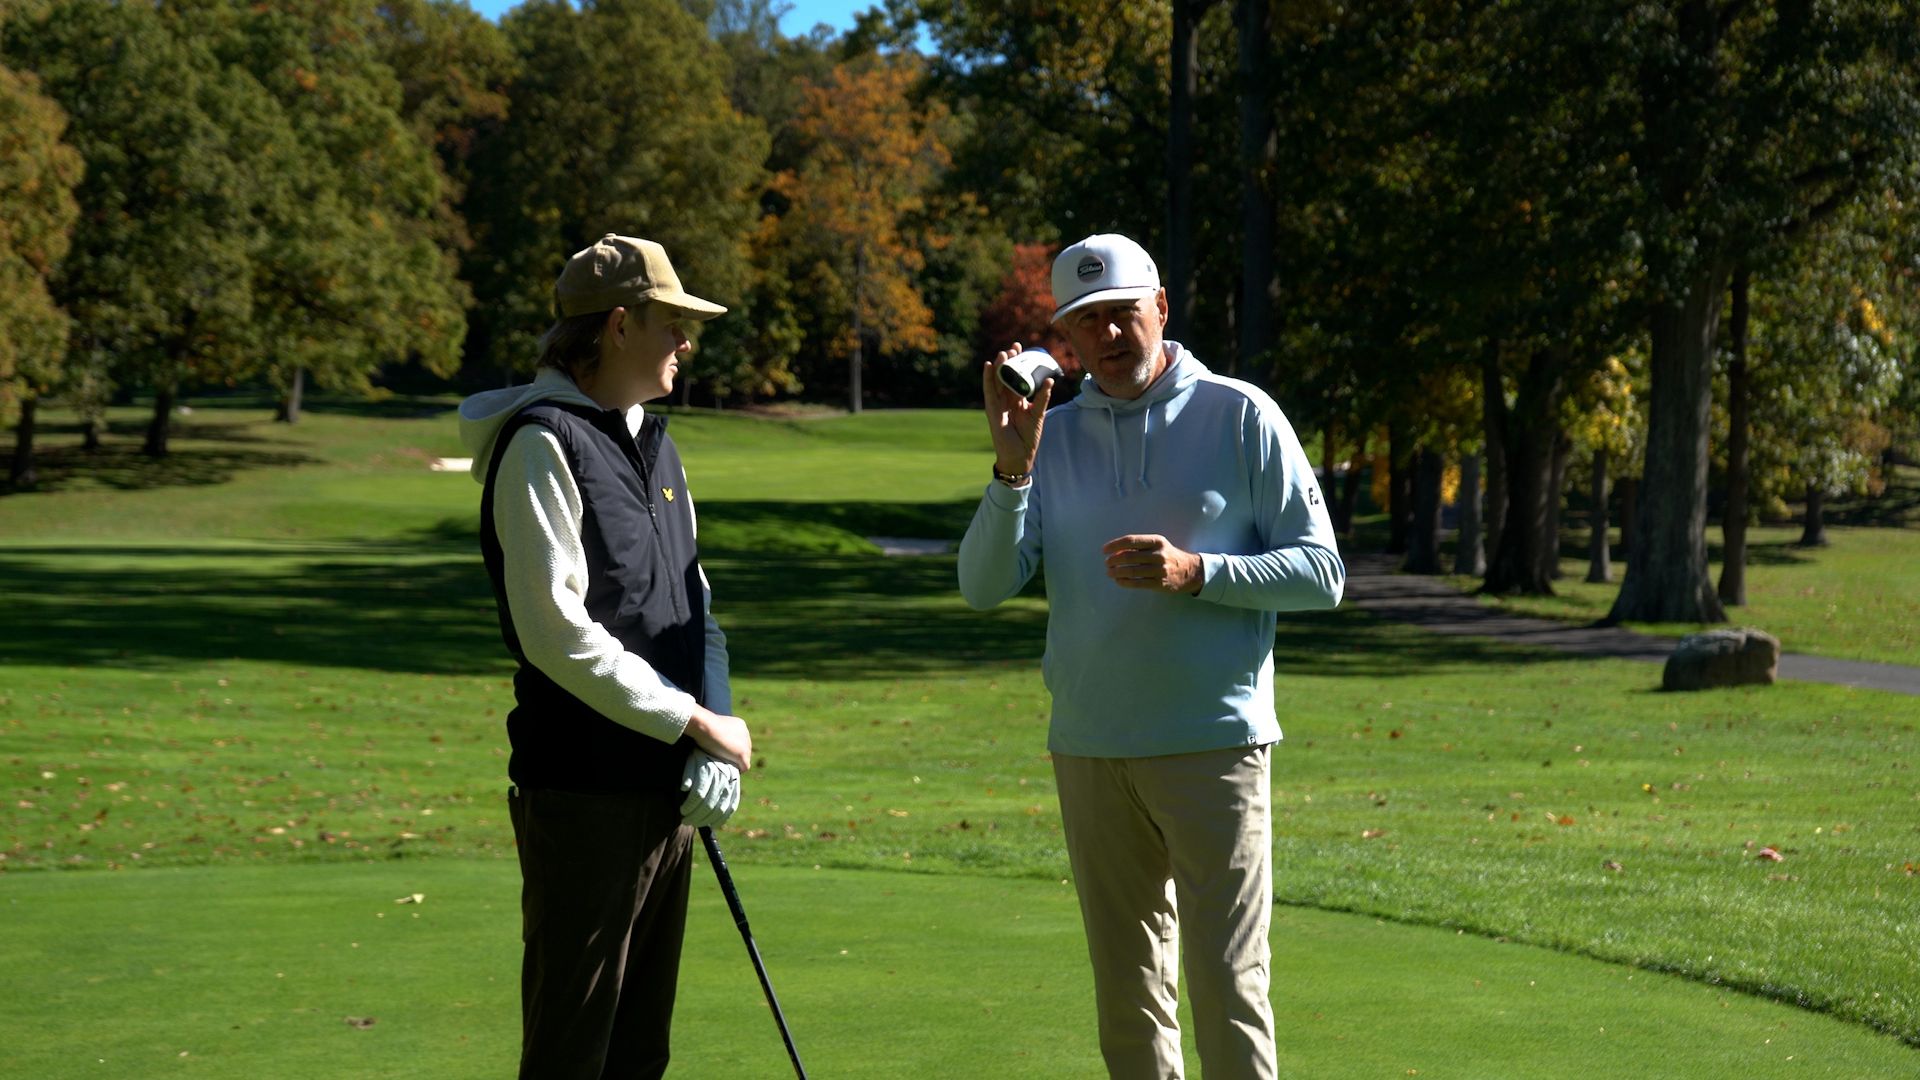 Top 100 Teacher explains when and how to use a rangefinder off the tee